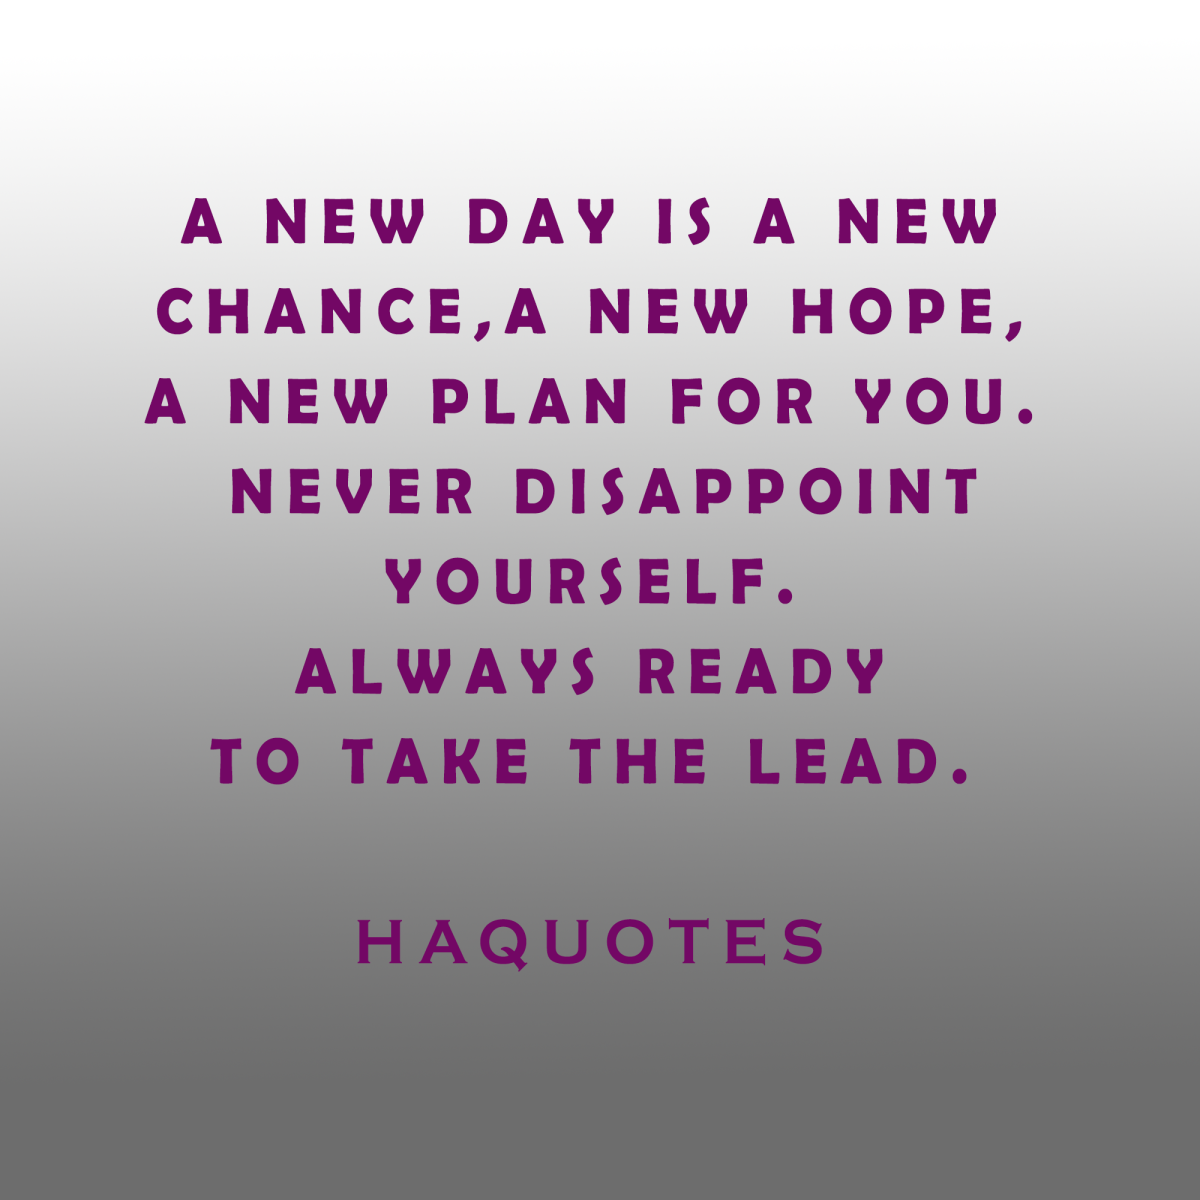 New Day Quote | New Hope Quote | New Chance Quote | Lead Quote